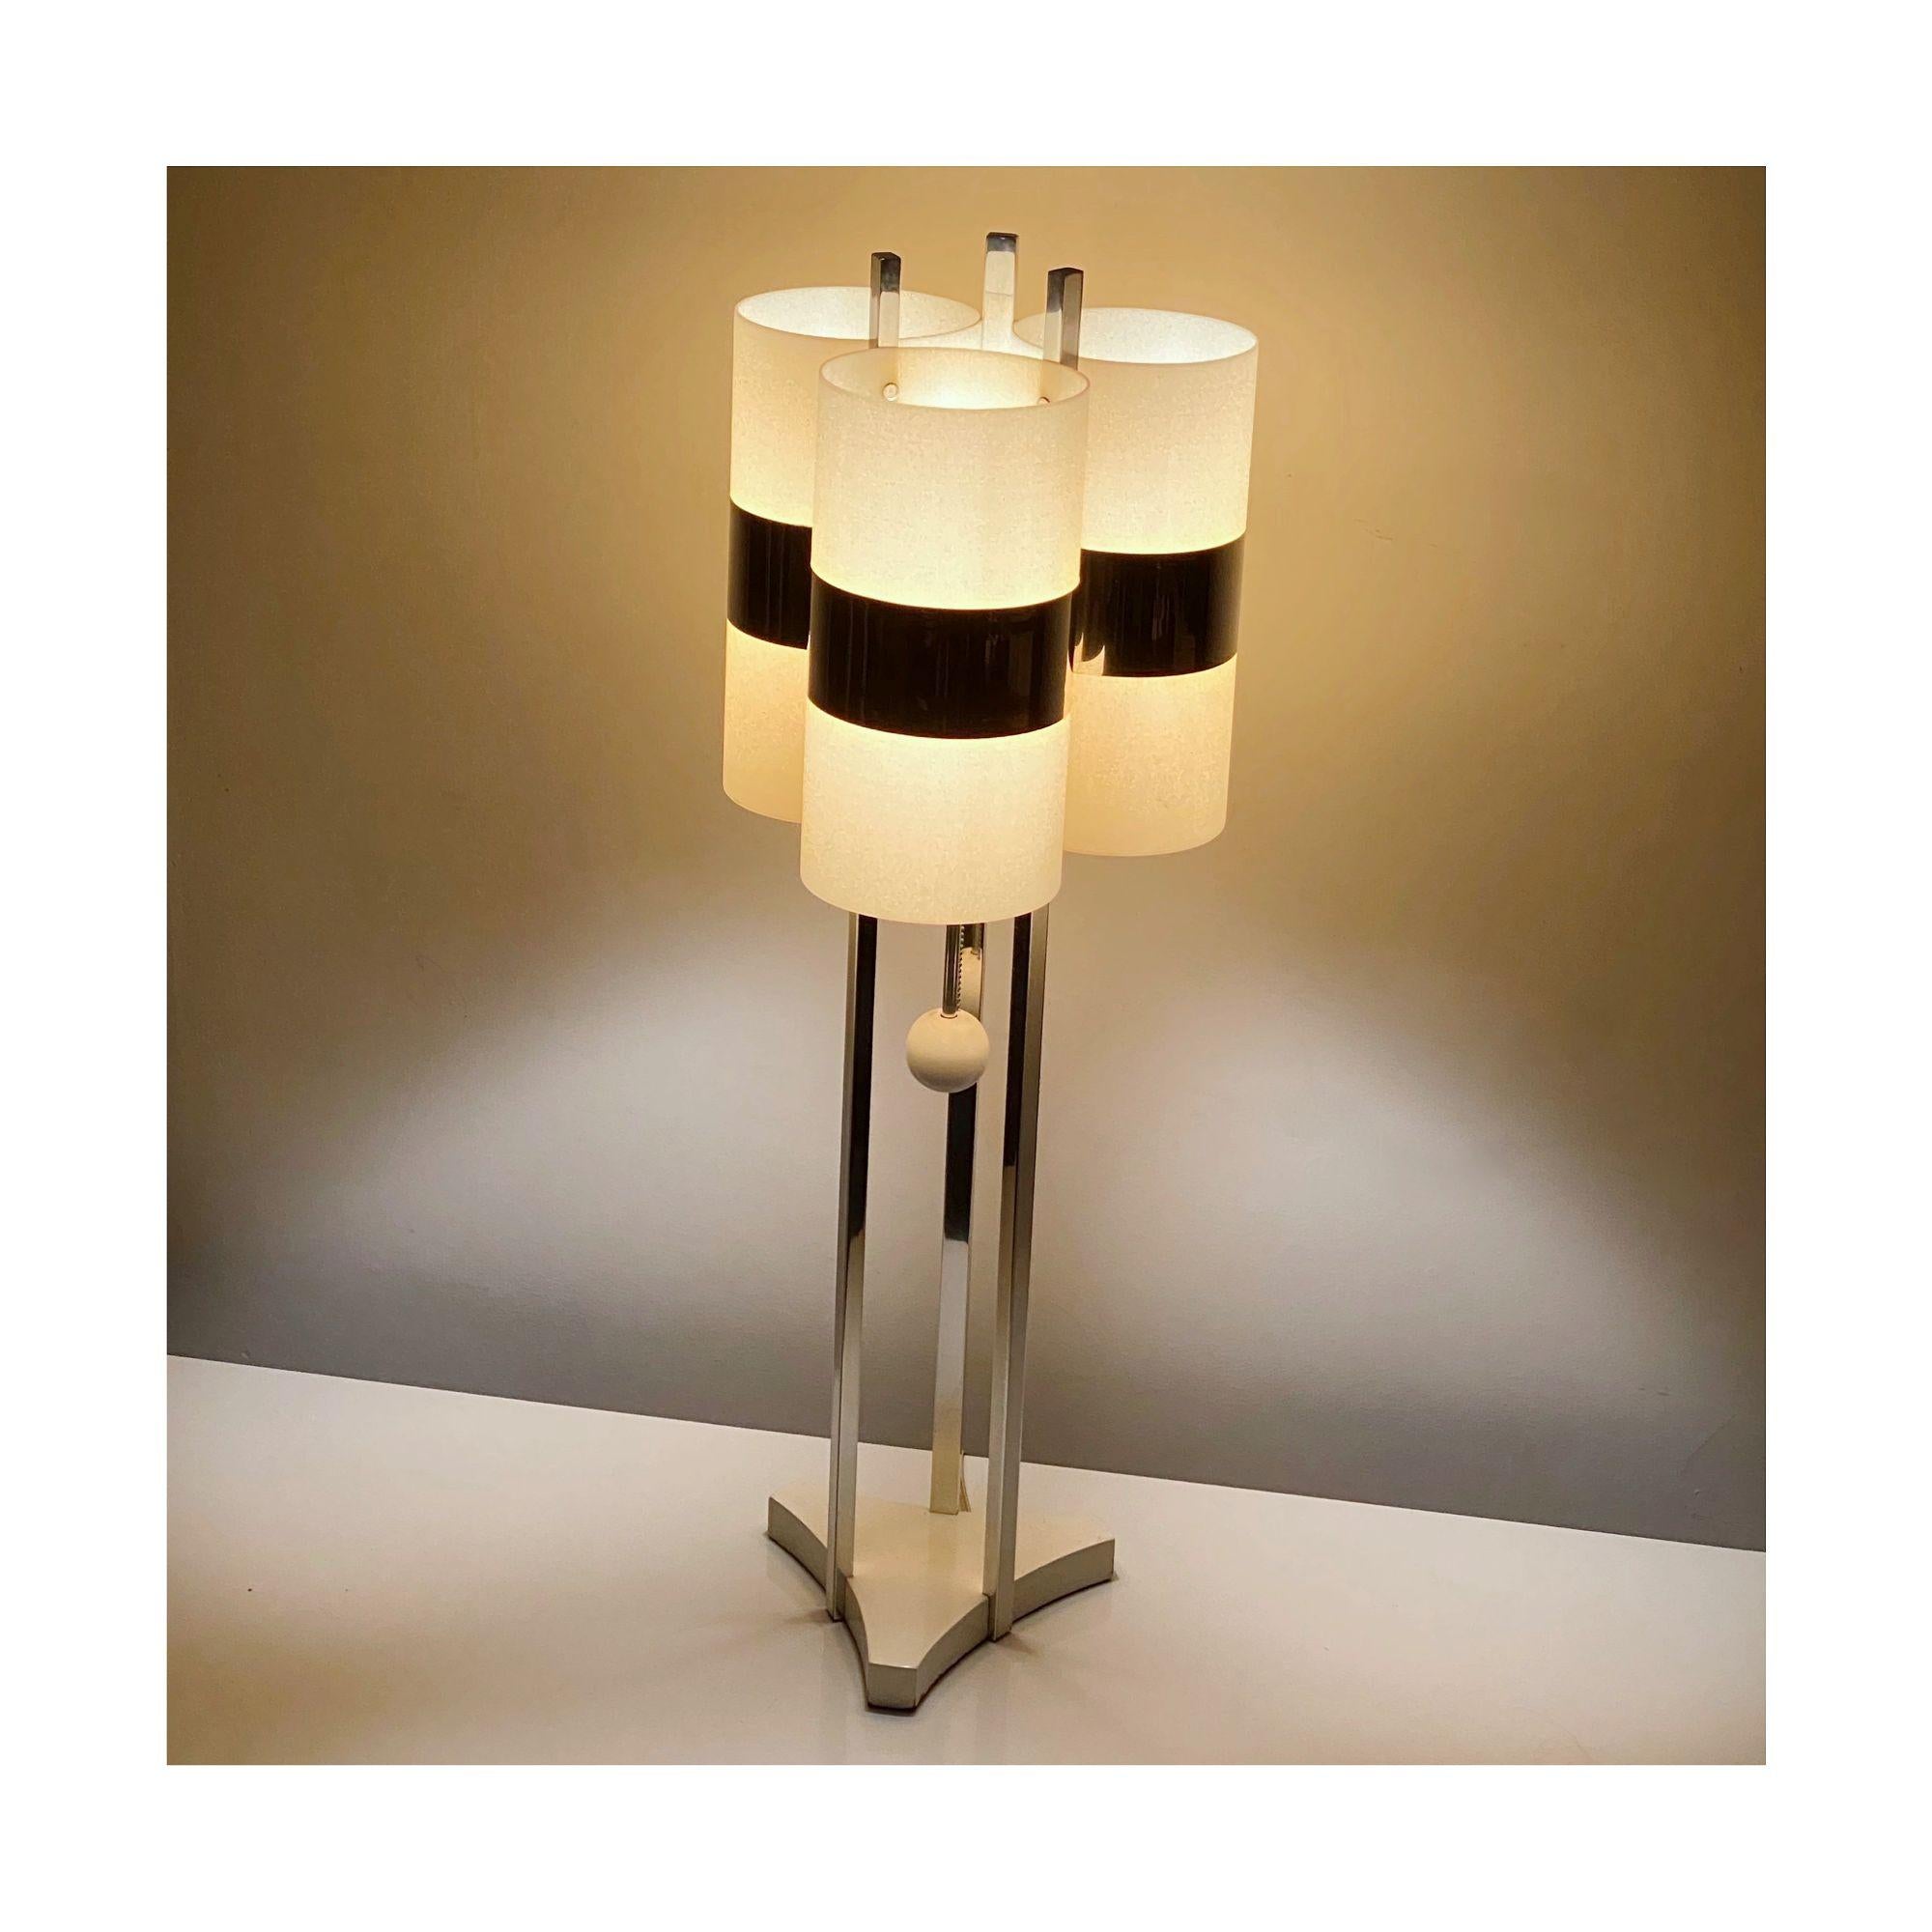 Space Age Rare Table Lamp in Chrome and Acrylic by Modeline, circa 1970s For Sale 4